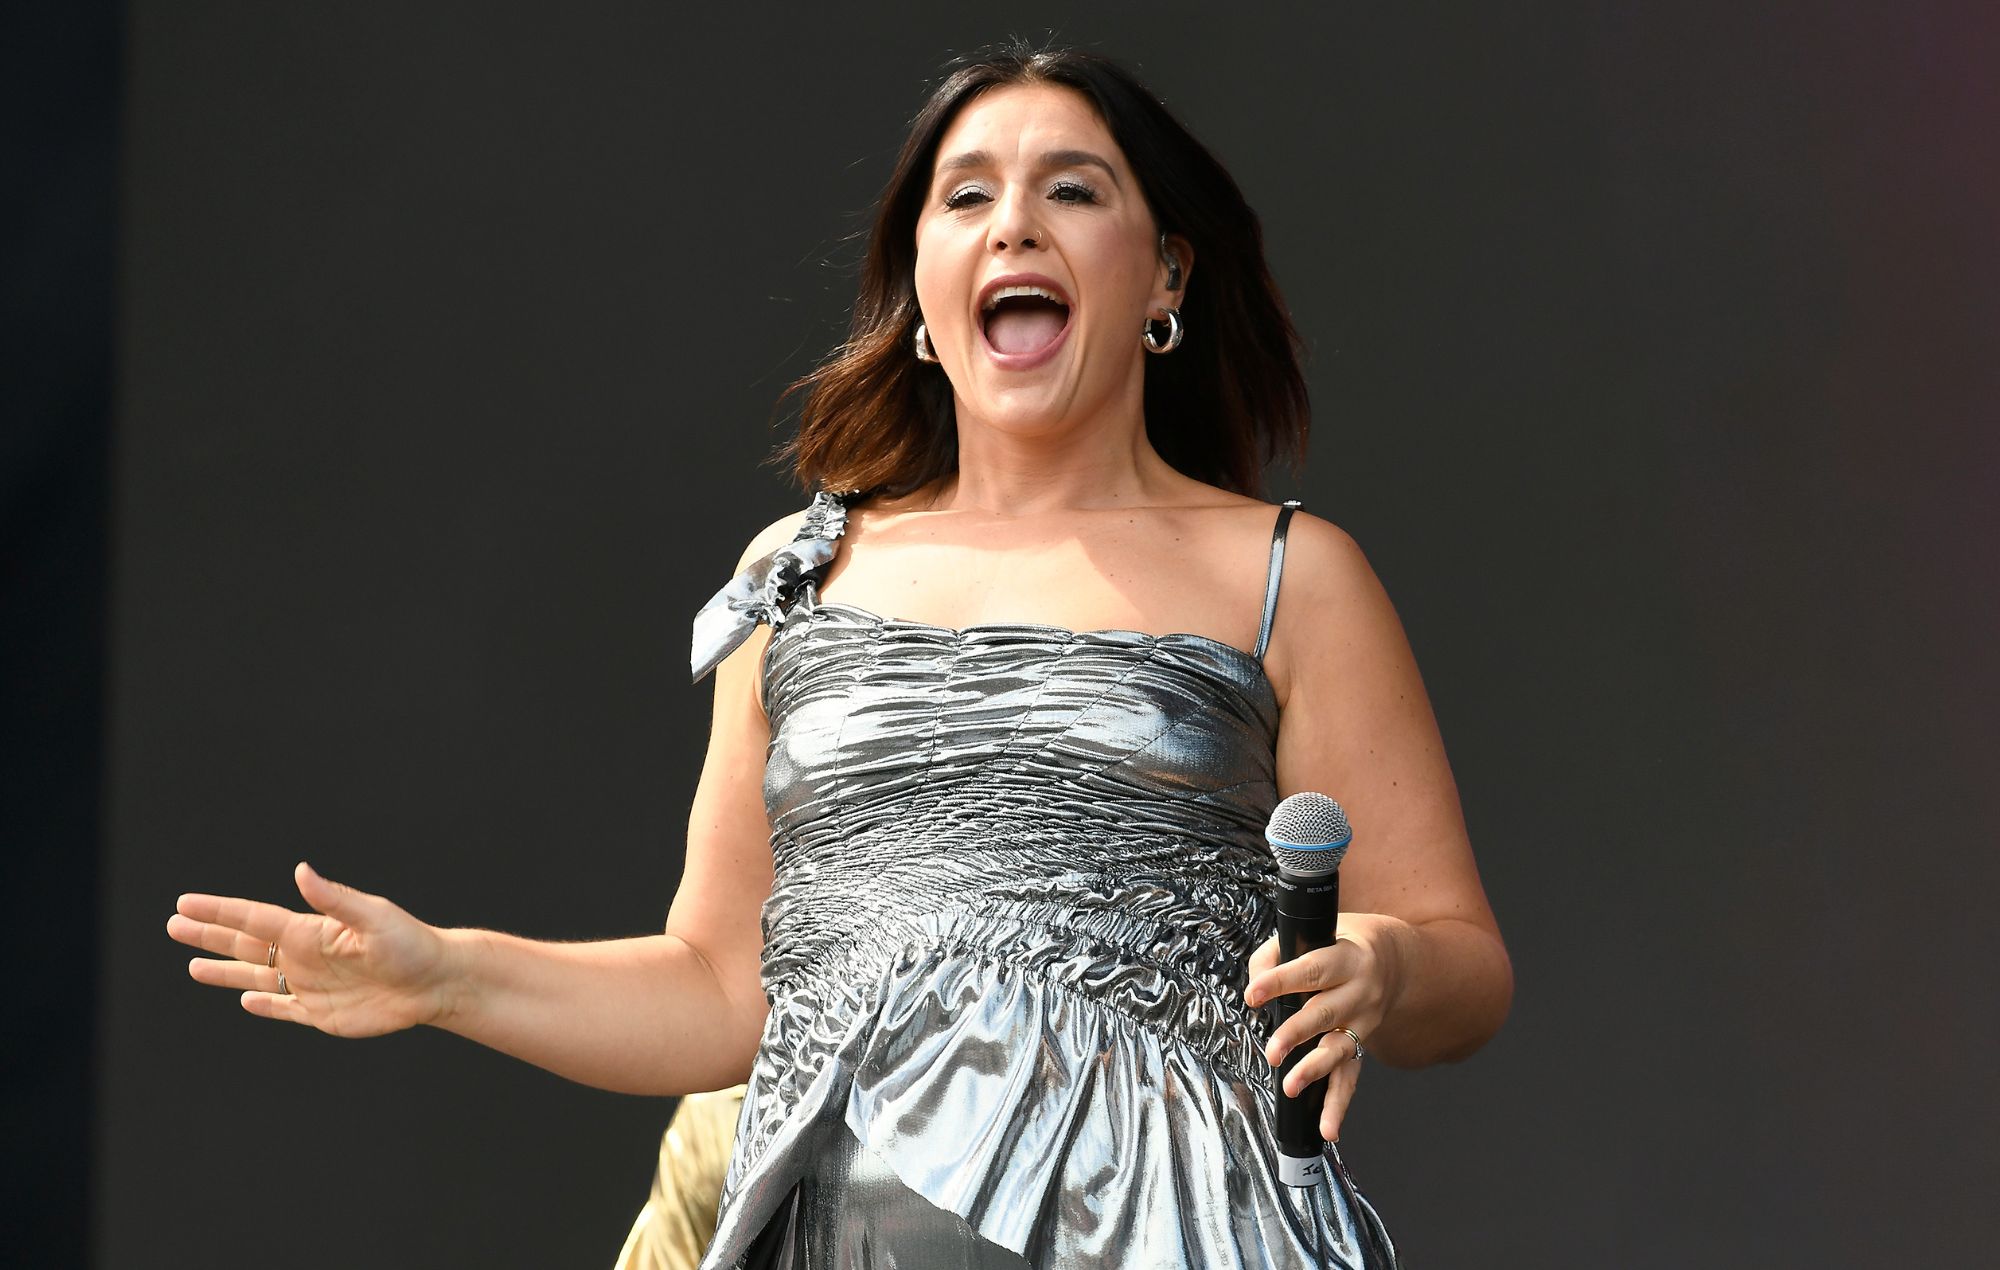 Jessie Ware performs during the 2023 Austin City Limits Music Festival at Zilker Park on October 07, 2023 in Austin, Texas